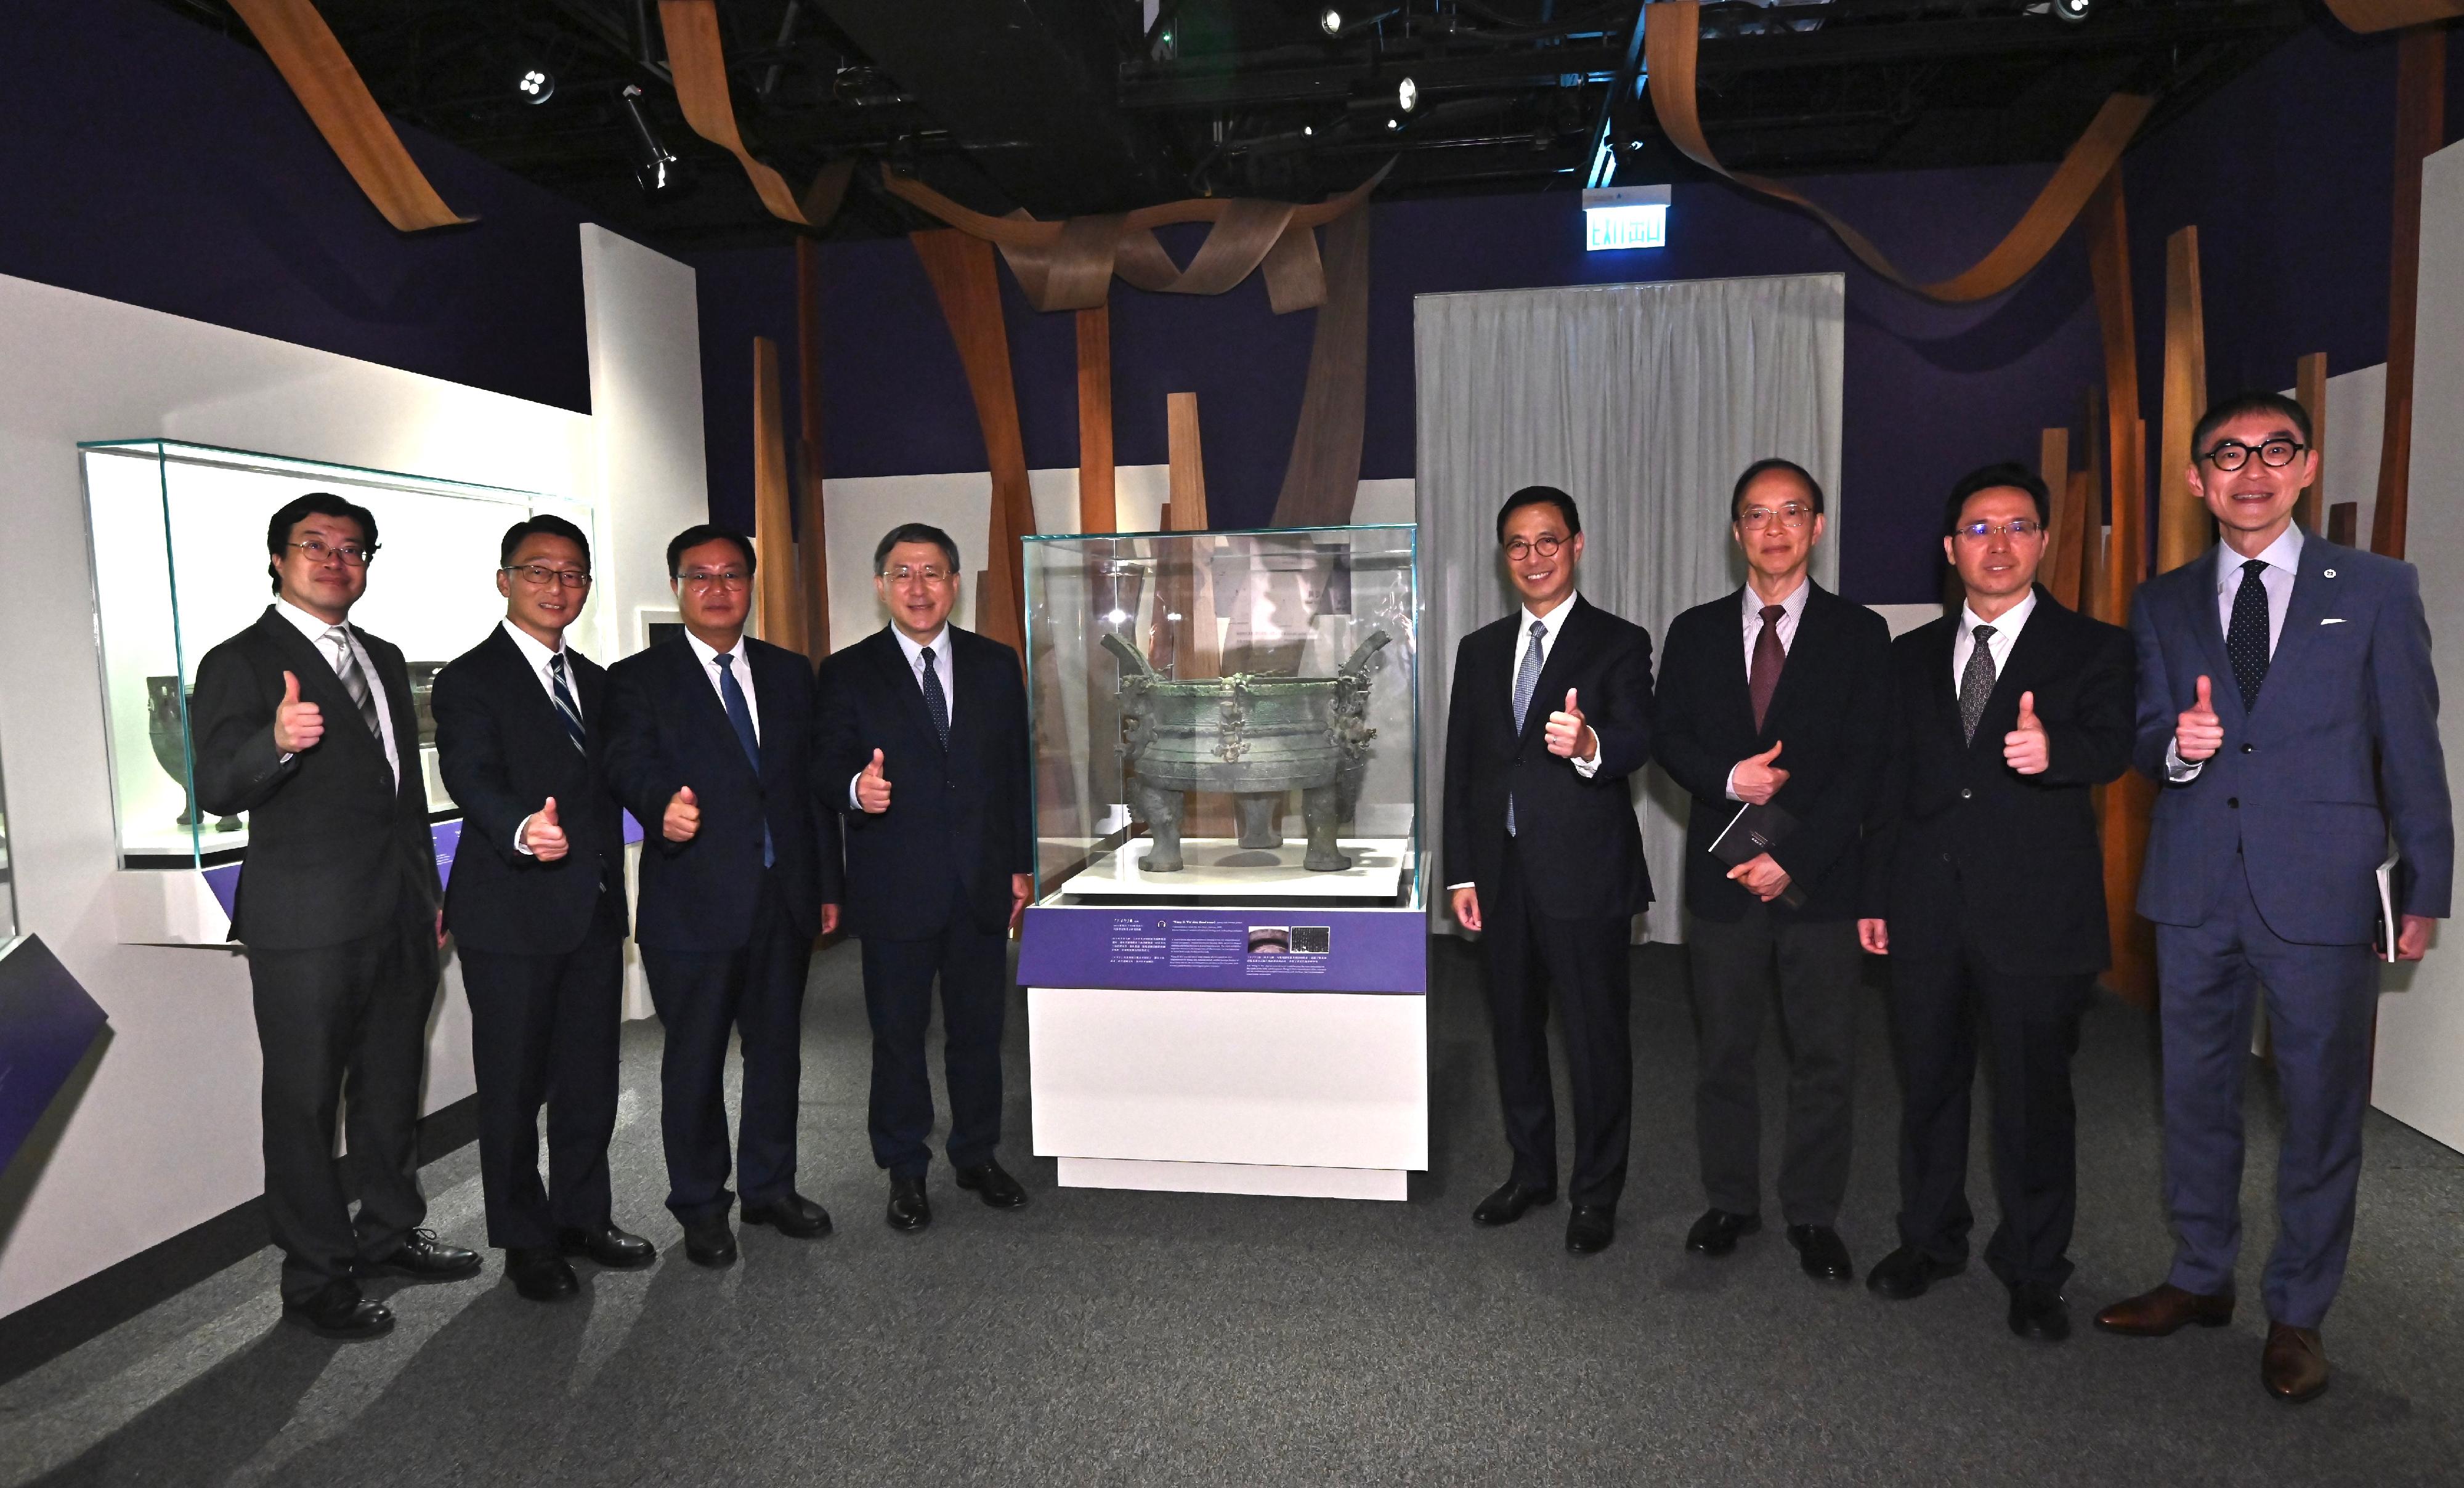 The Deputy Chief Secretary for Administration, Mr Cheuk Wing-hing, attended the opening ceremony of "The Hong Kong Jockey Club Series: The Ancient Civilisation of the Xia, Shang and Zhou Dynasties in Henan Province" today (April 2). Photo shows (from left) the Museum Director of the Hong Kong Museum of History, Mr Ng Chi-wo; the Director of Leisure and Cultural Services, Mr Vincent Liu; the Director-General of the Culture and Tourism Department of Henan Province, Mr Huang Dongsheng; Mr Cheuk; the Secretary for Culture, Sports and Tourism, Mr Kevin Yeung; the Chairman of the Legislative Council Panel on Home Affairs, Culture and Sports, Mr Ma Fung-kwok; the Director of the Henan Provincial Administration of Cultural Heritage, Dr Ren Wei; and the Chairman of Museum Advisory Committee, Professor Douglas So, touring the exhibition.